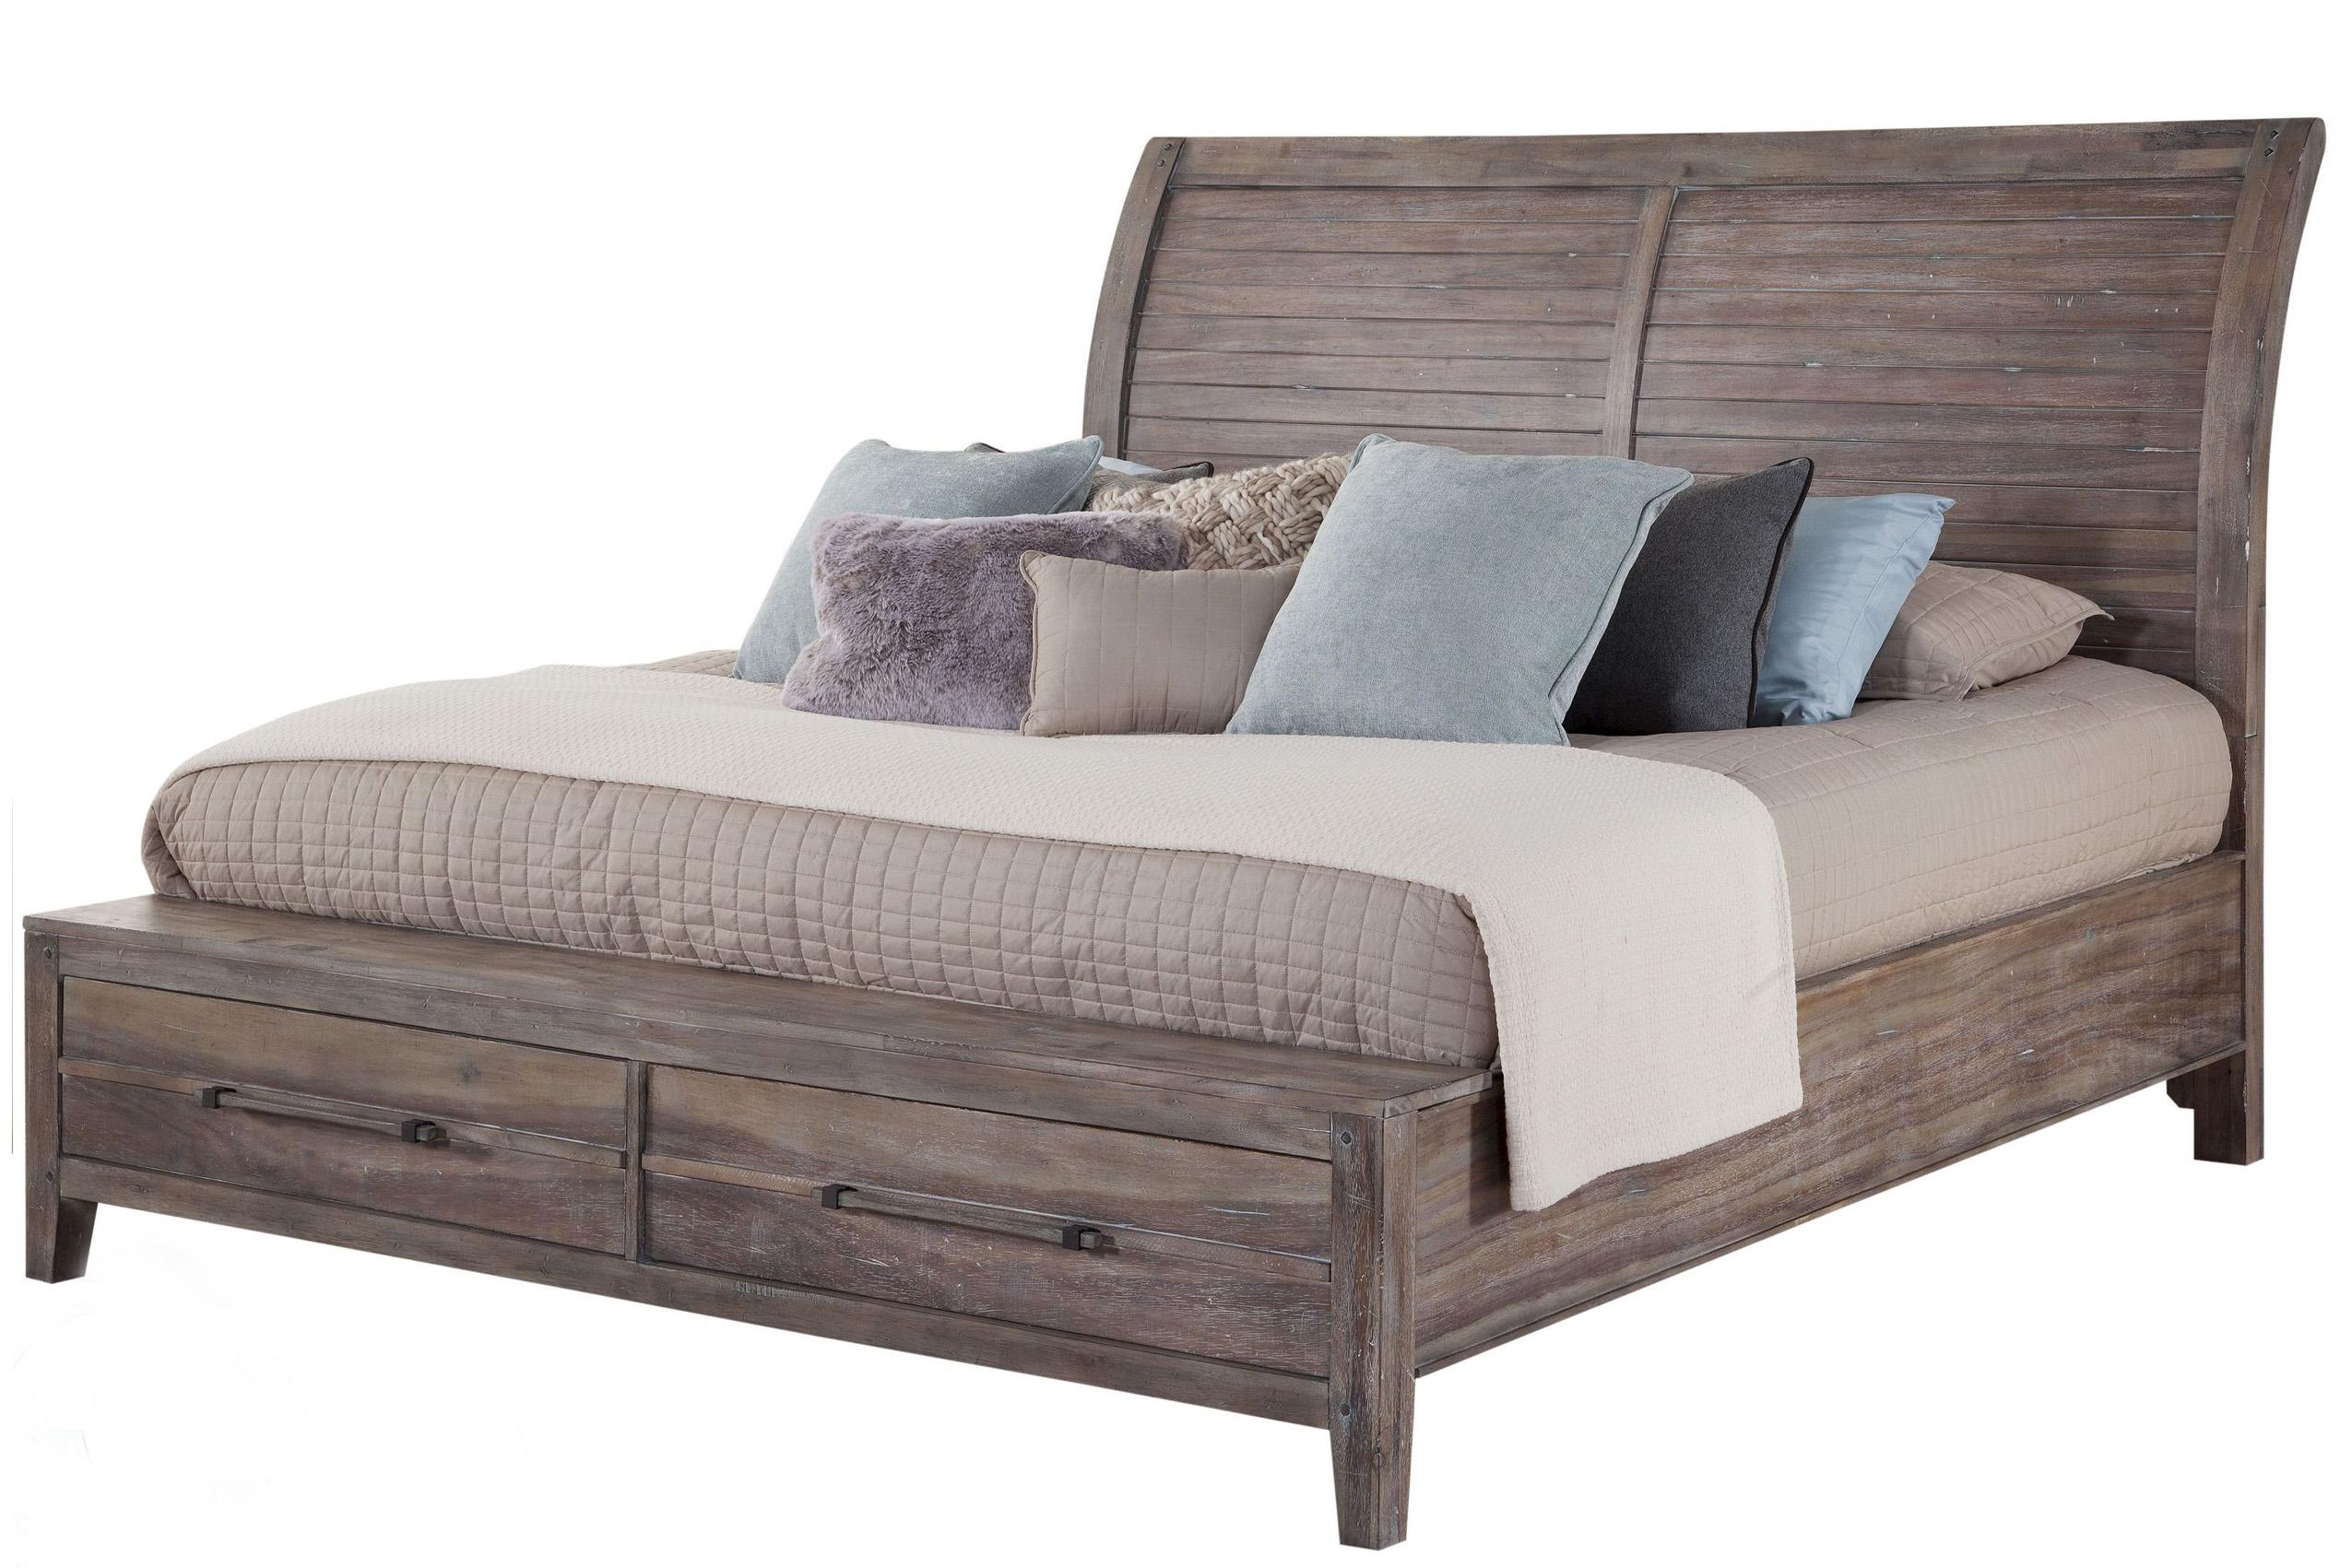 

    
American Woodcrafters AURORA 2800-50SLES Sleigh Bedroom Set Driftwood/Gray 2800-QSLST-5PC
